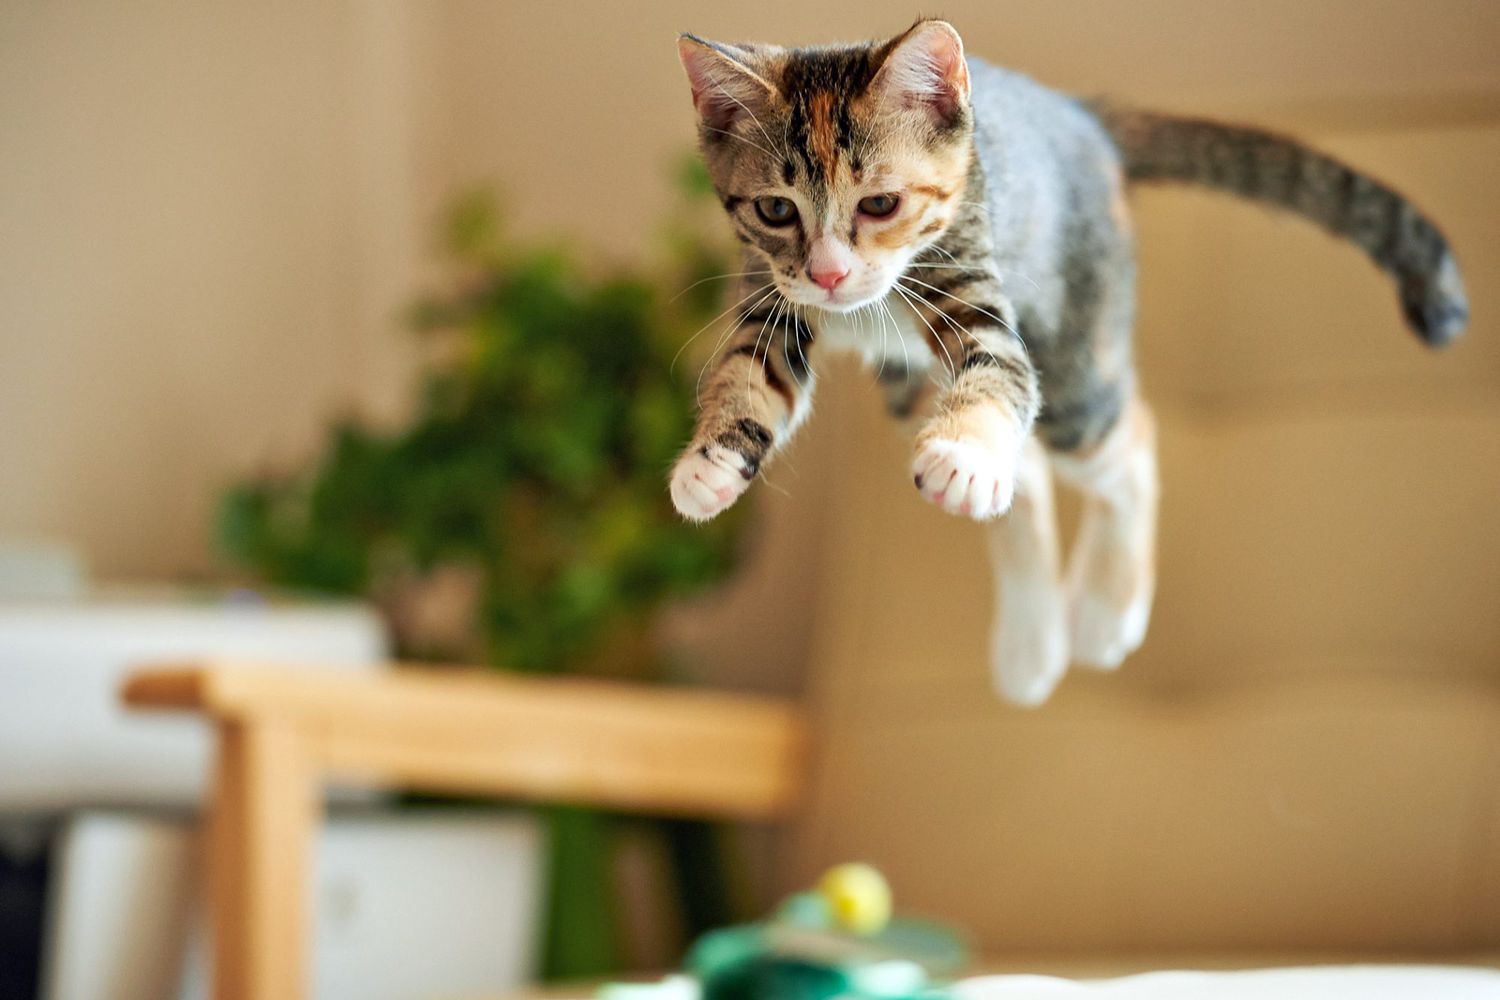 tabby kitten playing cat game, jumping in air and chasing motorized cat toy